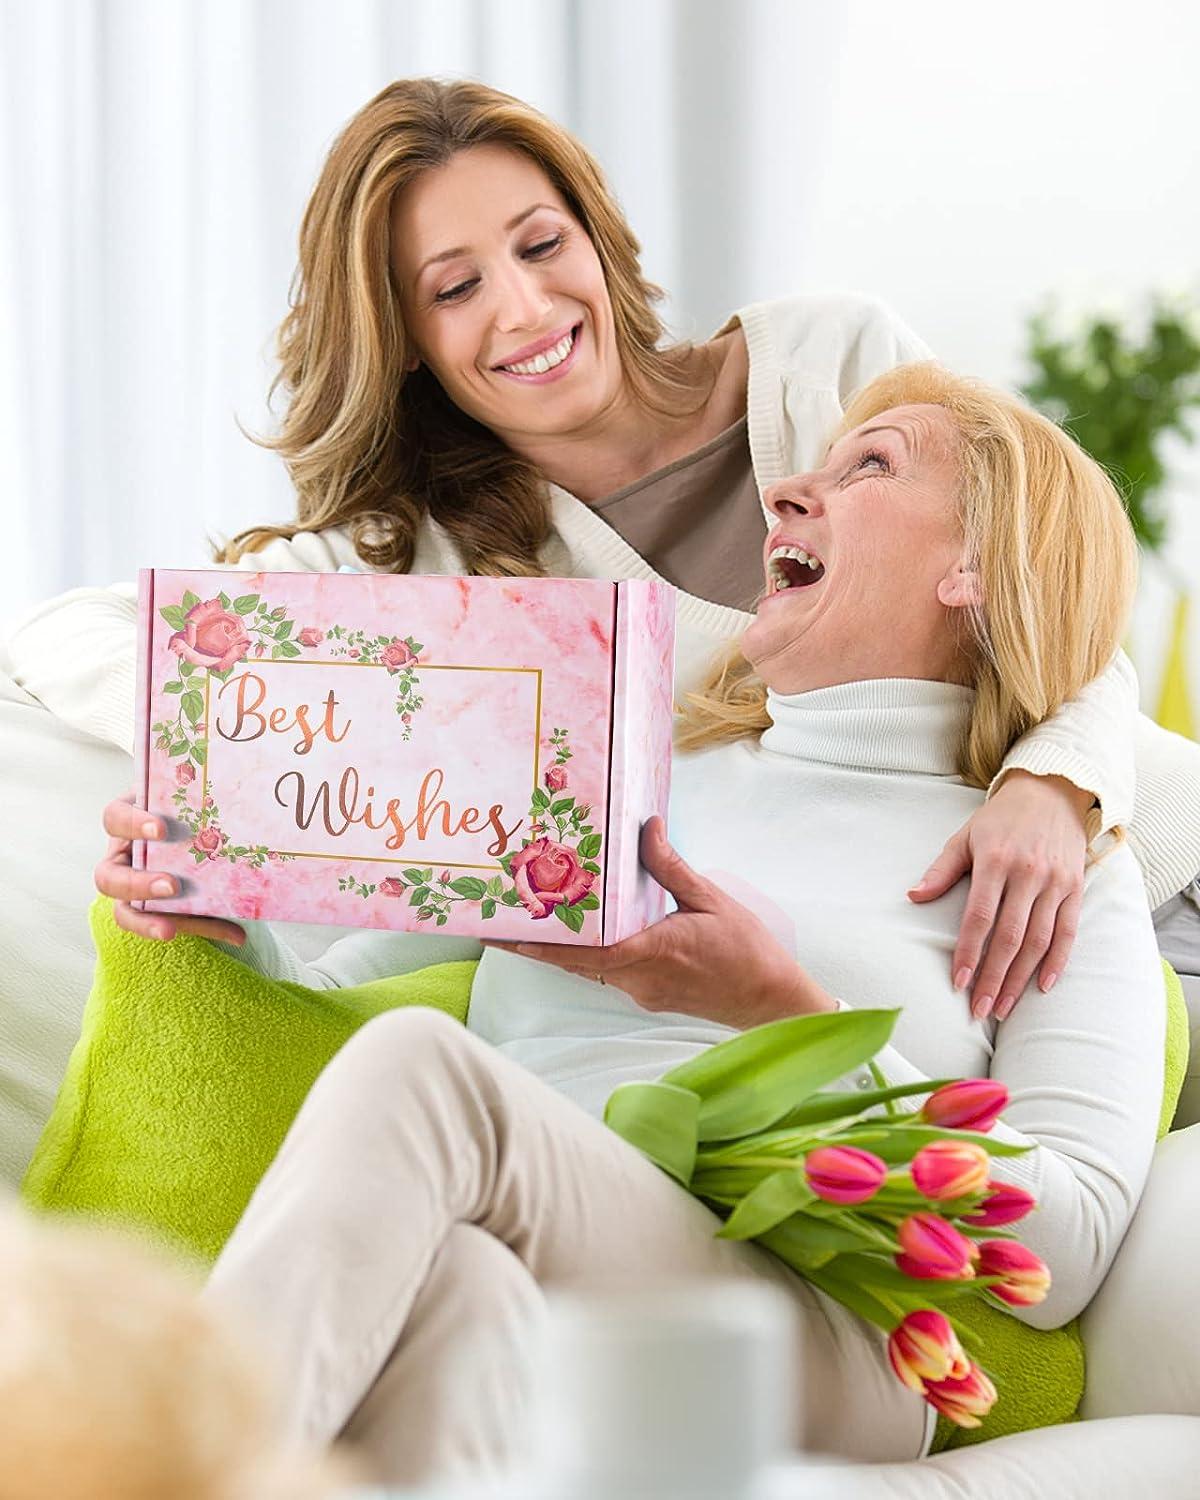 Birthday Gifts for Women, Relaxation Gifts for Friends Female, Self Care  Spa Gifts for Women Who Have Everything, Unique Gifts Ideas for Mom Sisters